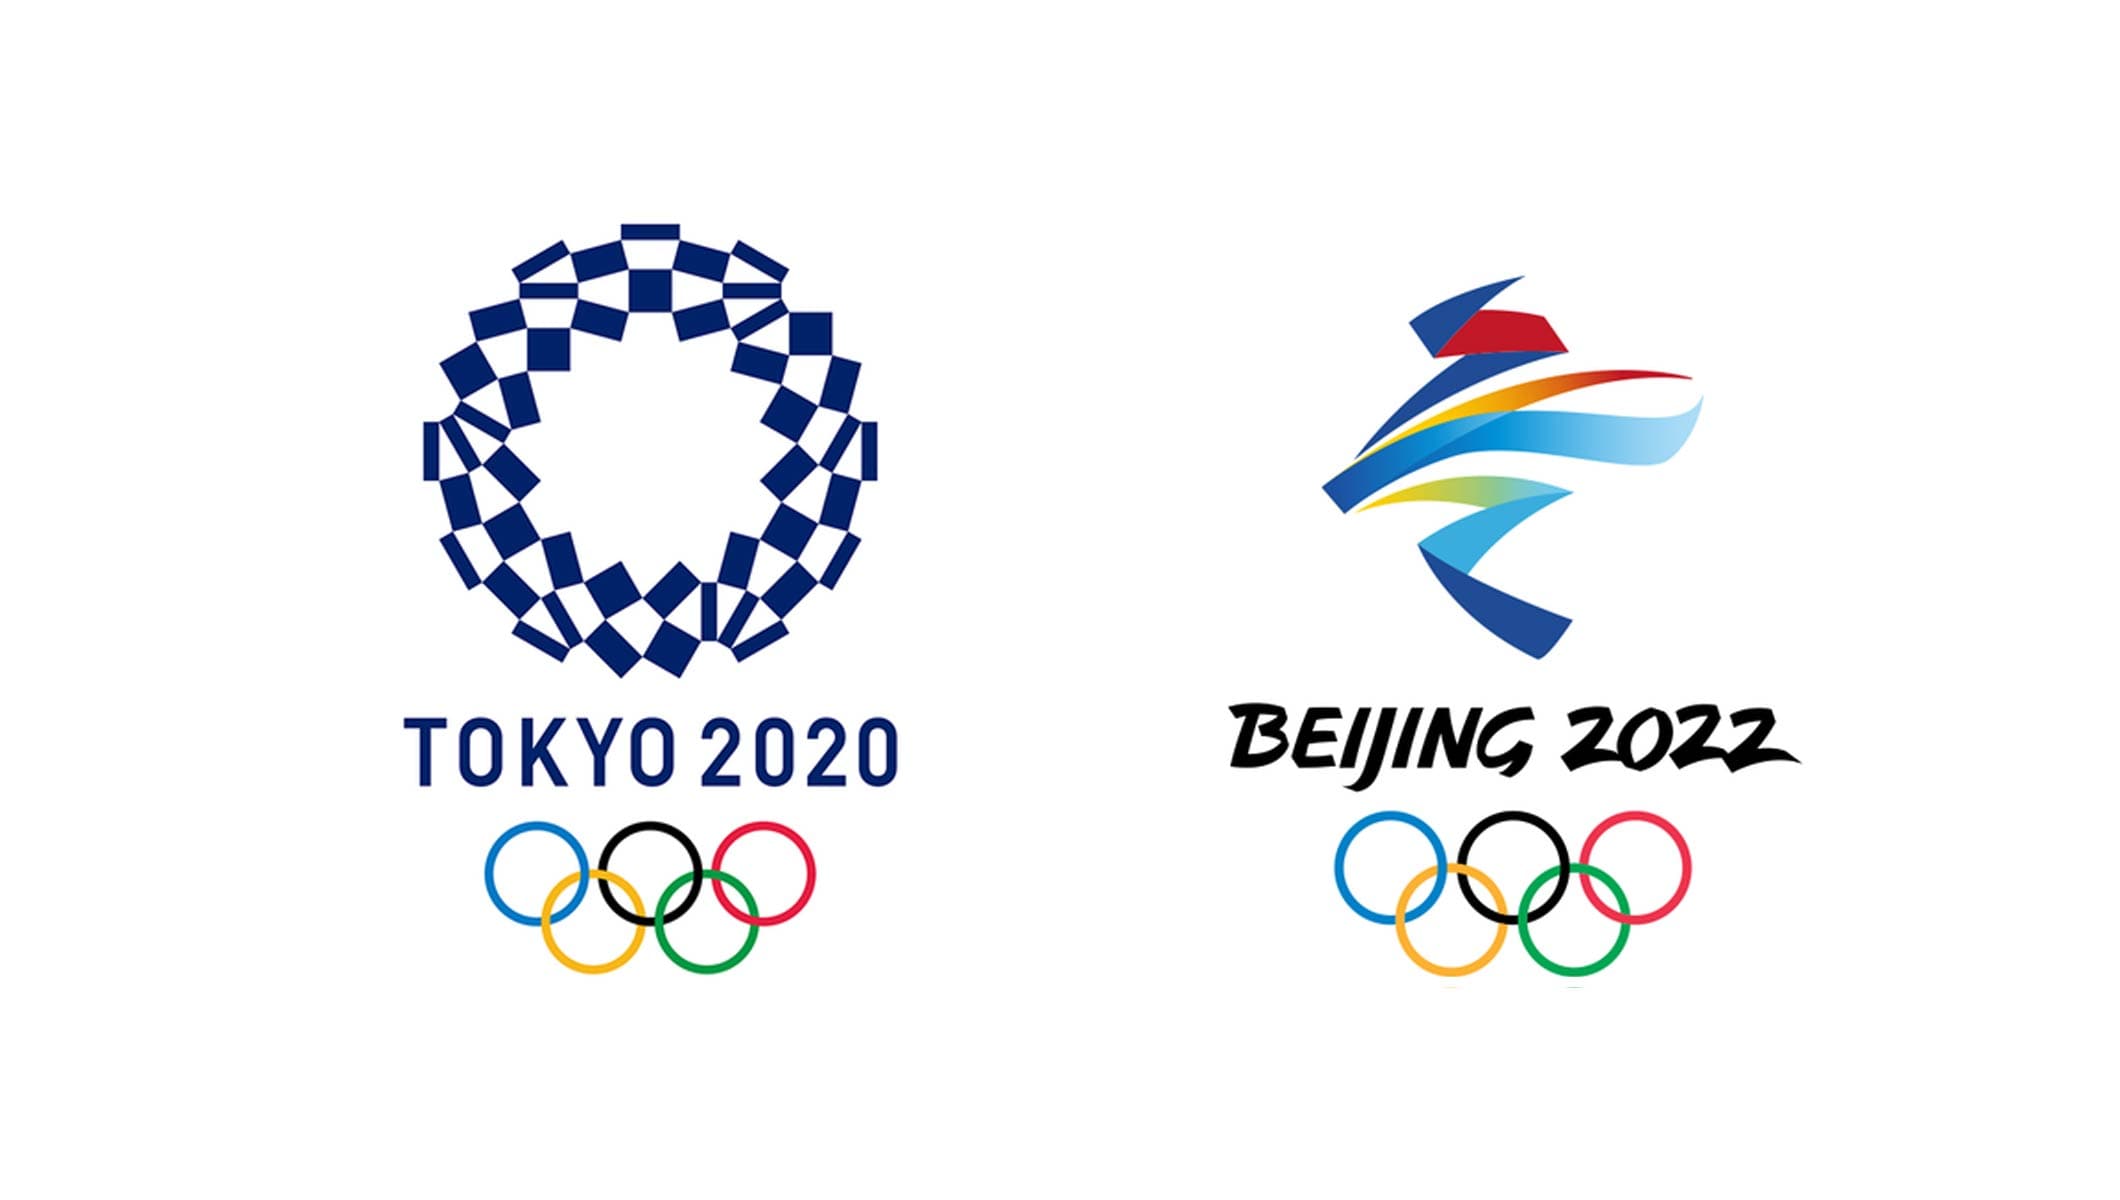 Tokyo 2020 and Beijing 2022 come together in spirit of Olympism ...